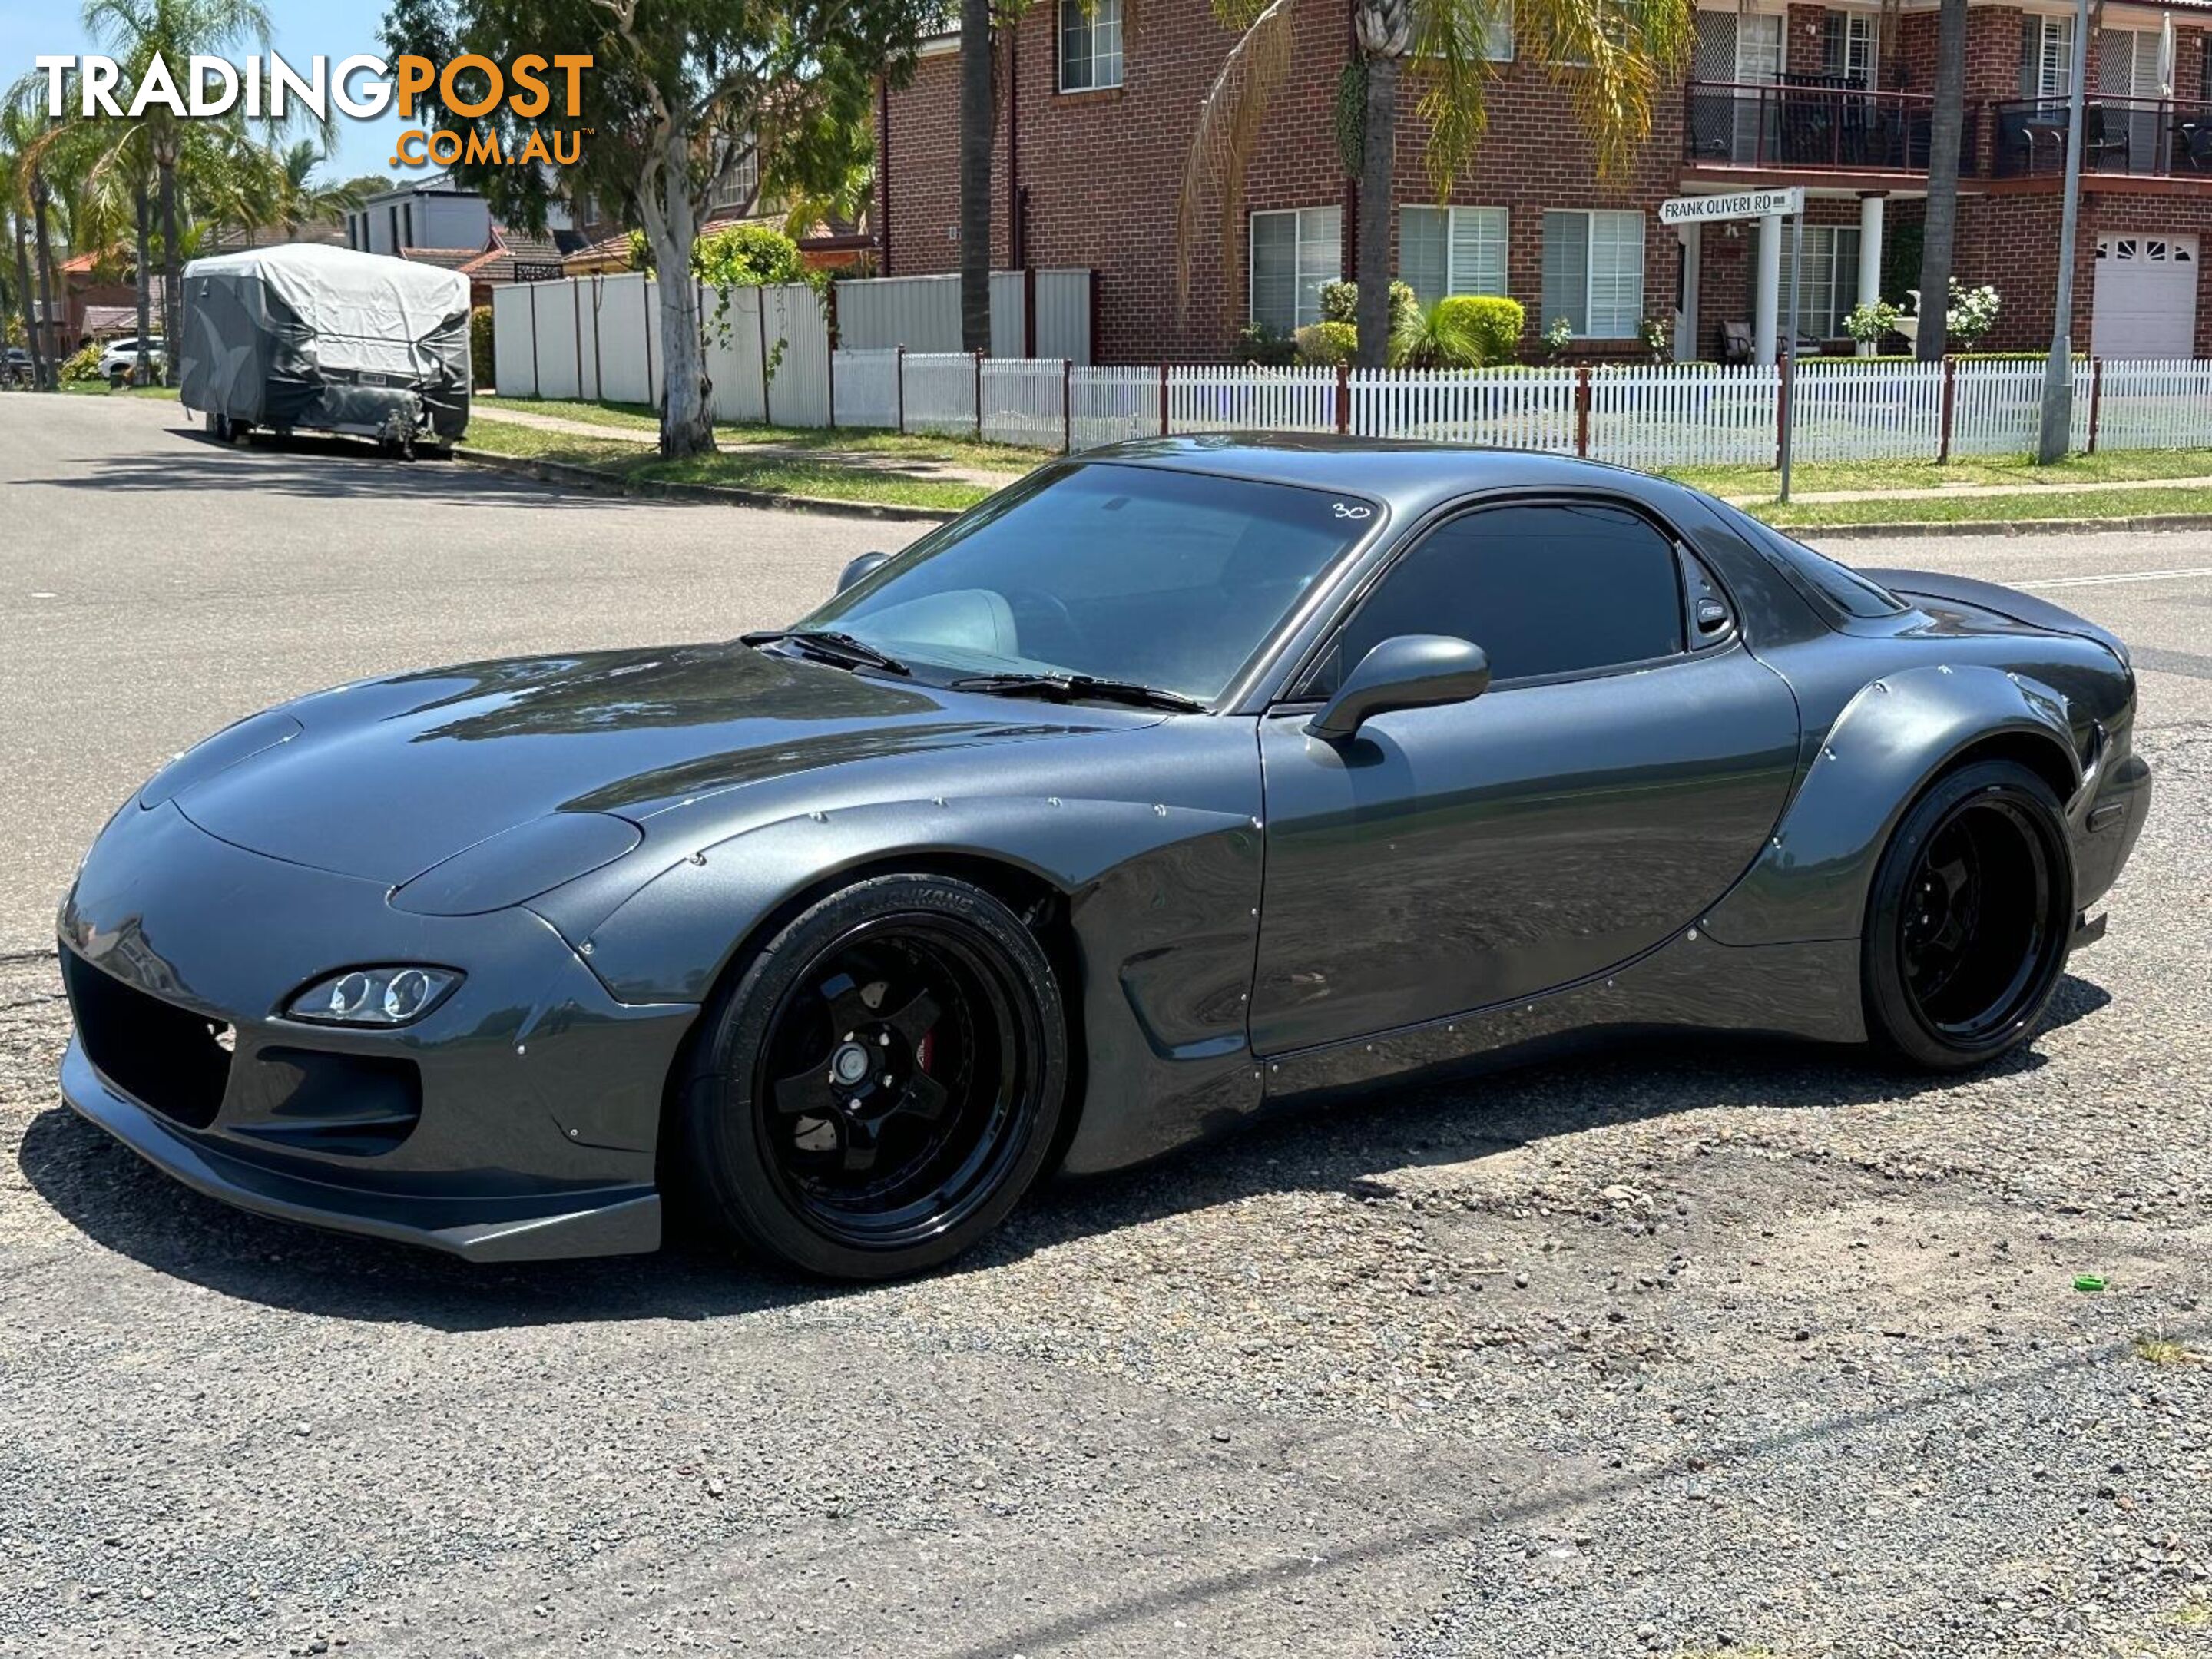 2000 MAZDA RX7 TWIN TURBO RB 8 2D COUPE